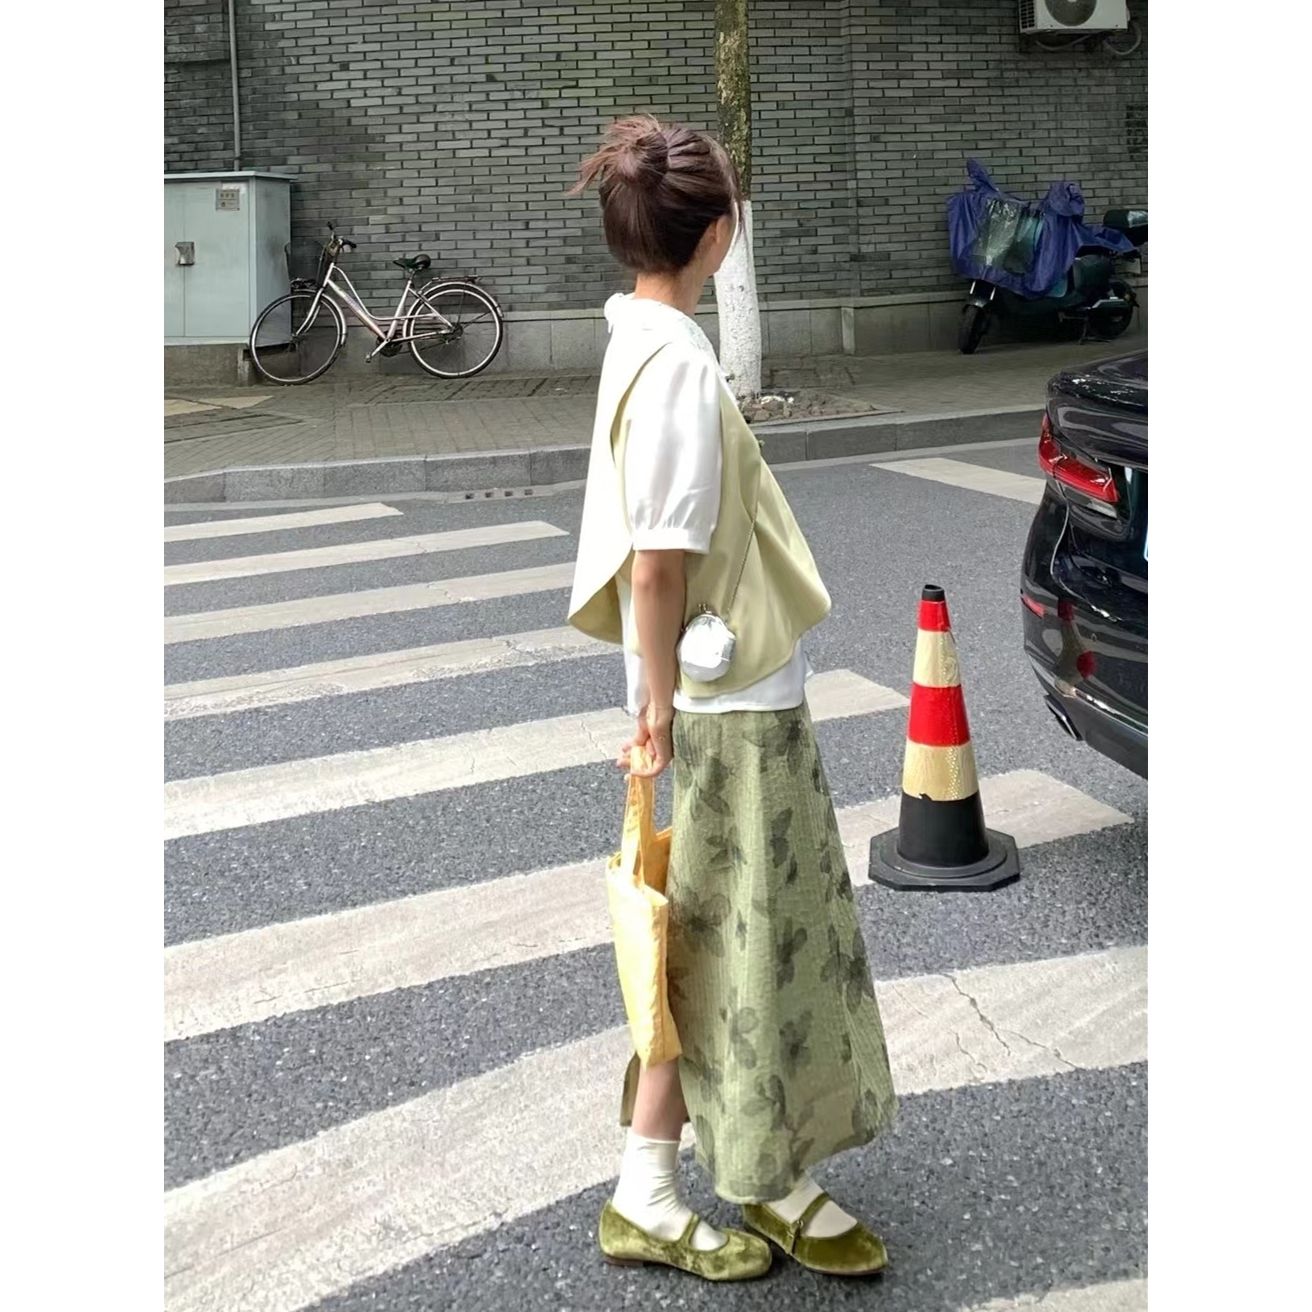 [Three-piece suit] New Chinese style national style vest vest splicing collar shirt retro high waist floral skirt